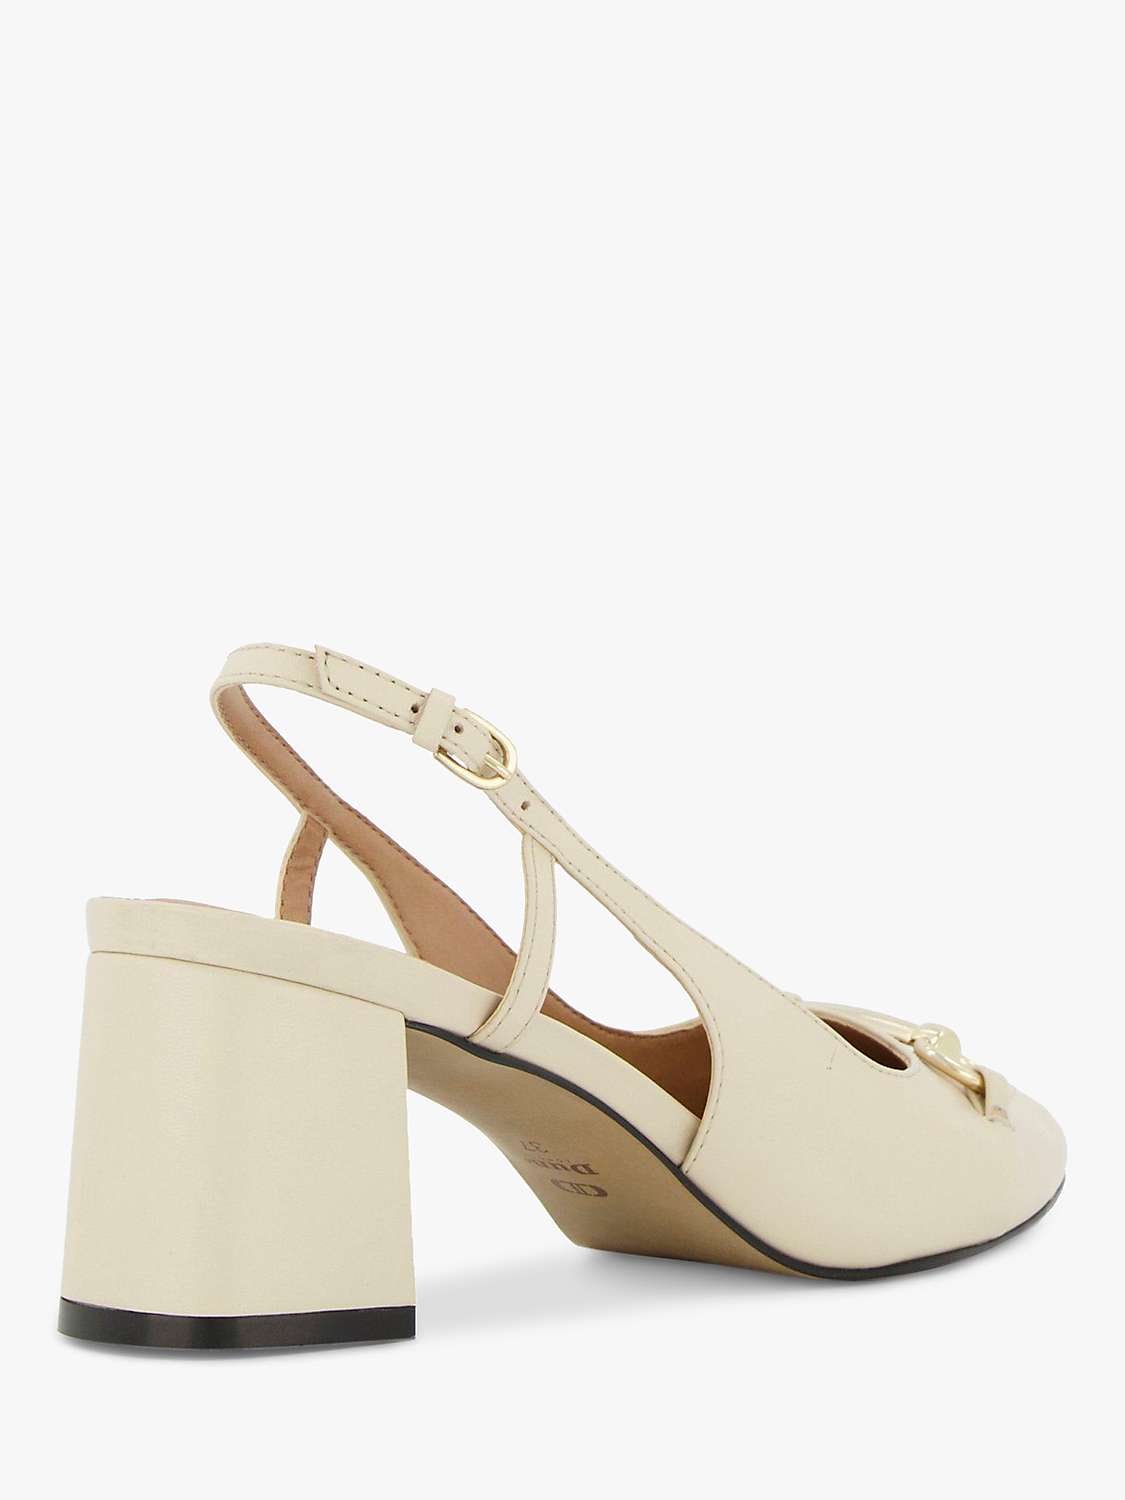 Buy Dune Cassie Leather Slingback Court Shoes Online at johnlewis.com